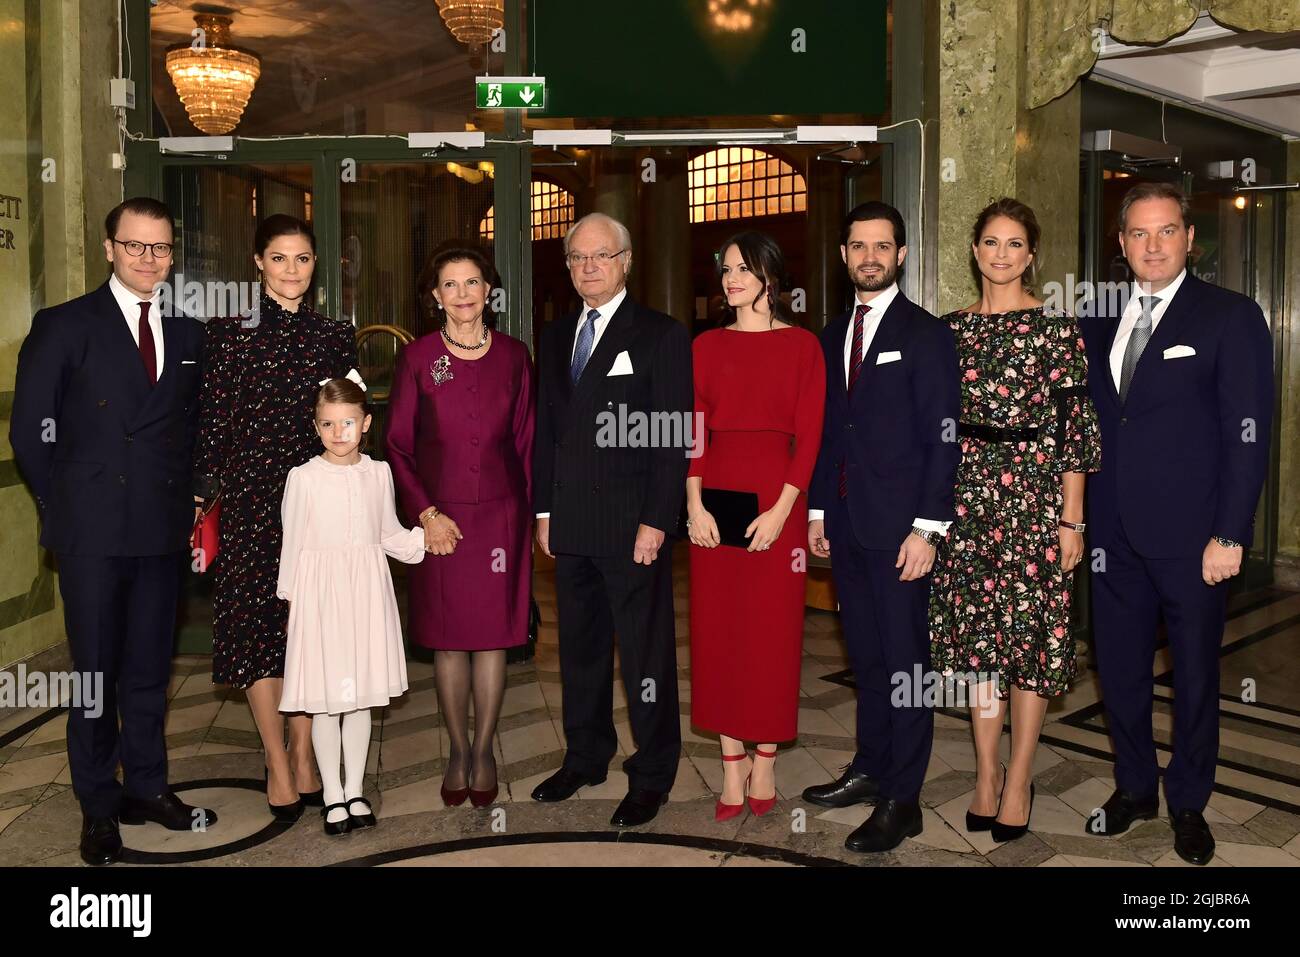 STOCKHOLM 2018-12-18 Prince Daniel Crown Princess Victoria, Princess Estelle, Queen Silvia, King Carl Gustaf, Princess Sofia, Prince Carl Philip, Princess Madeleine and Christopher O'Neill at seminar in connection with the Queen's 75th birthday at the Oscar Theatre in Stockholm on Tuesday. . Foto: Jonas Ekstromer / TT / kod 10030  Stock Photo